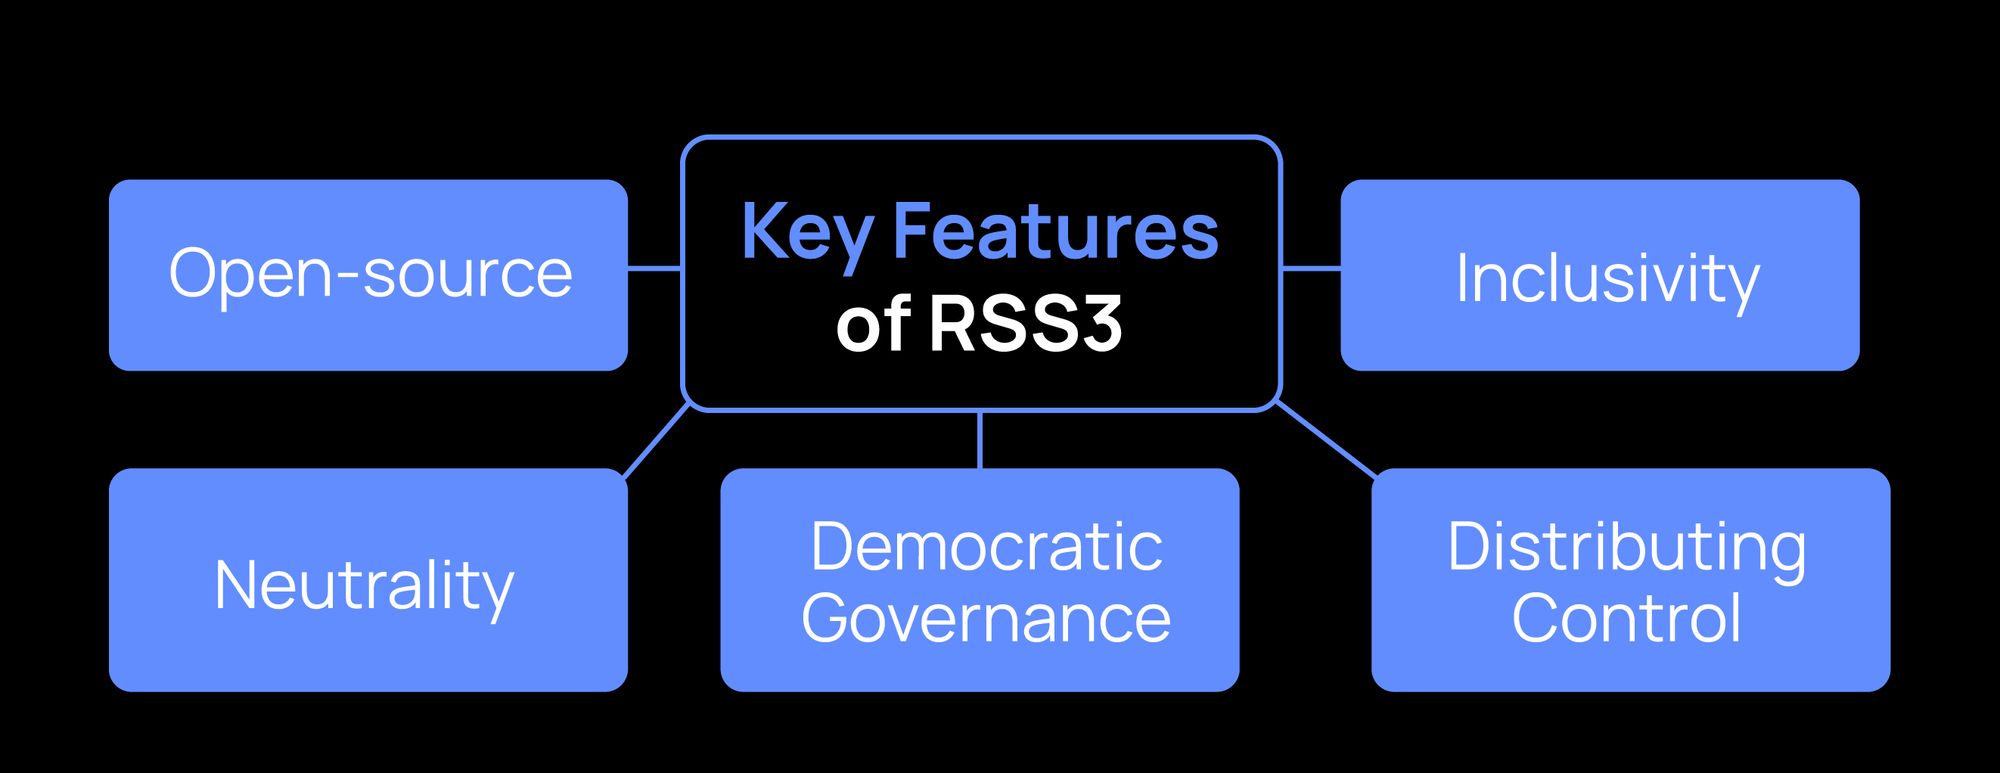 Key Features of RSS3